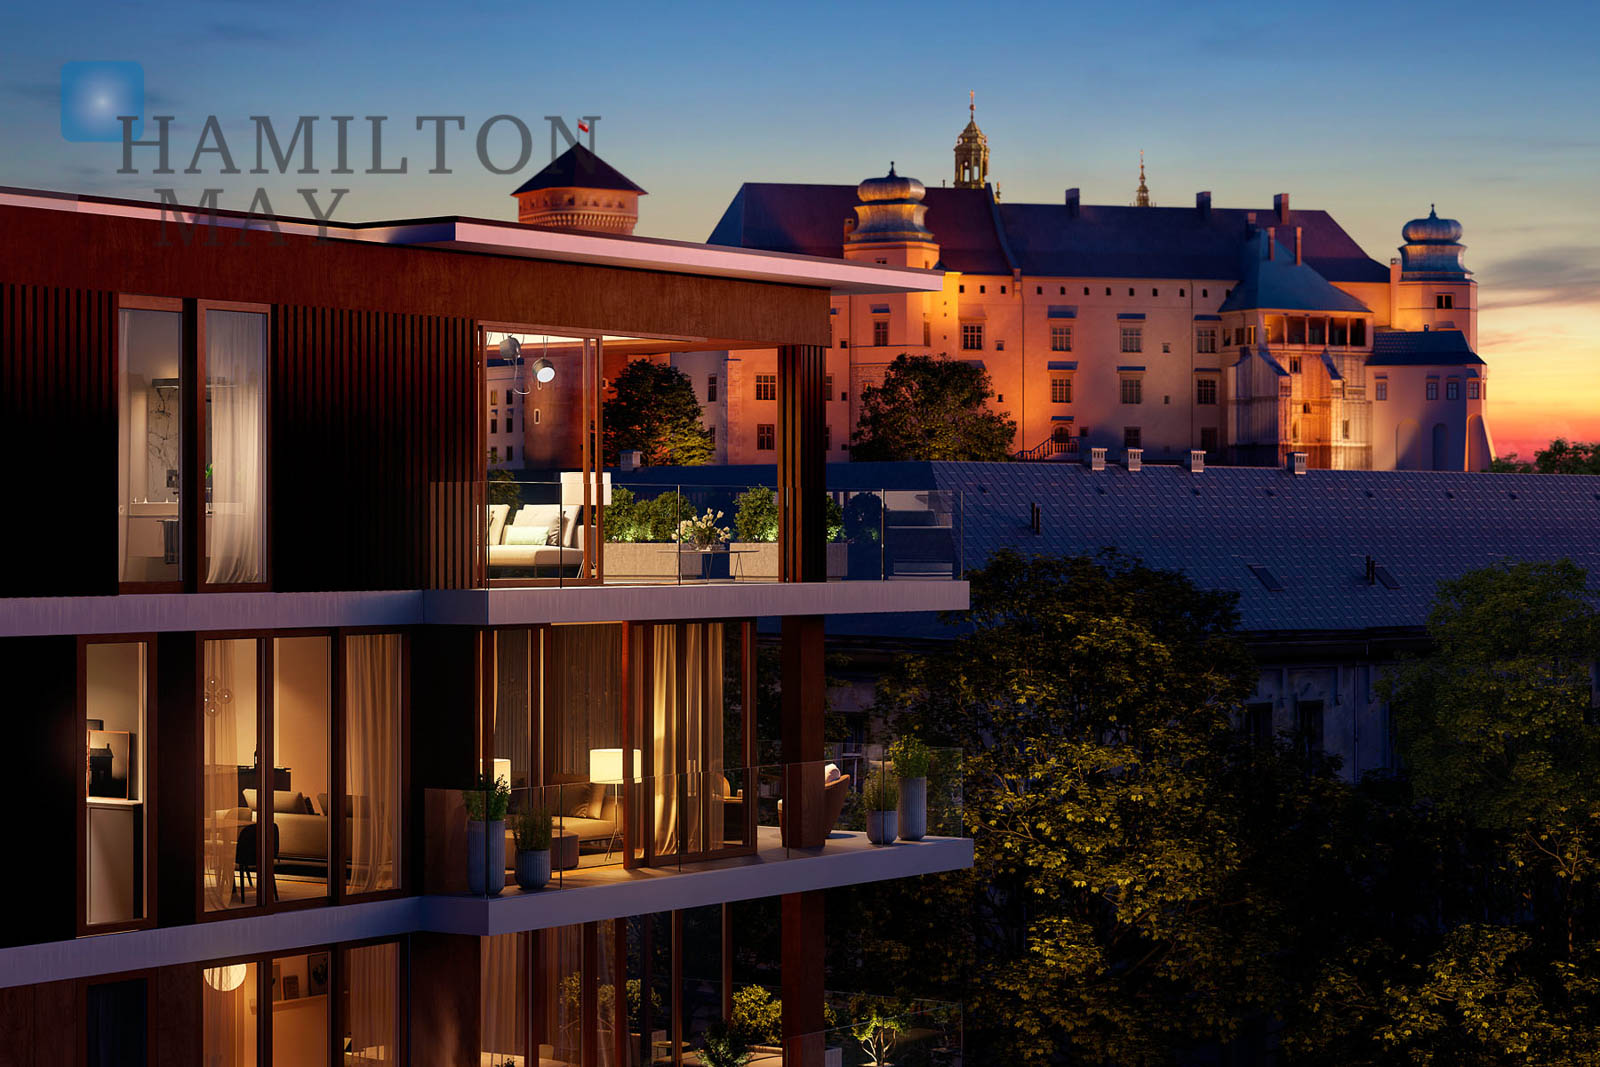 Angel Stradom - luxurious investment in Cracow's Kazimierz 